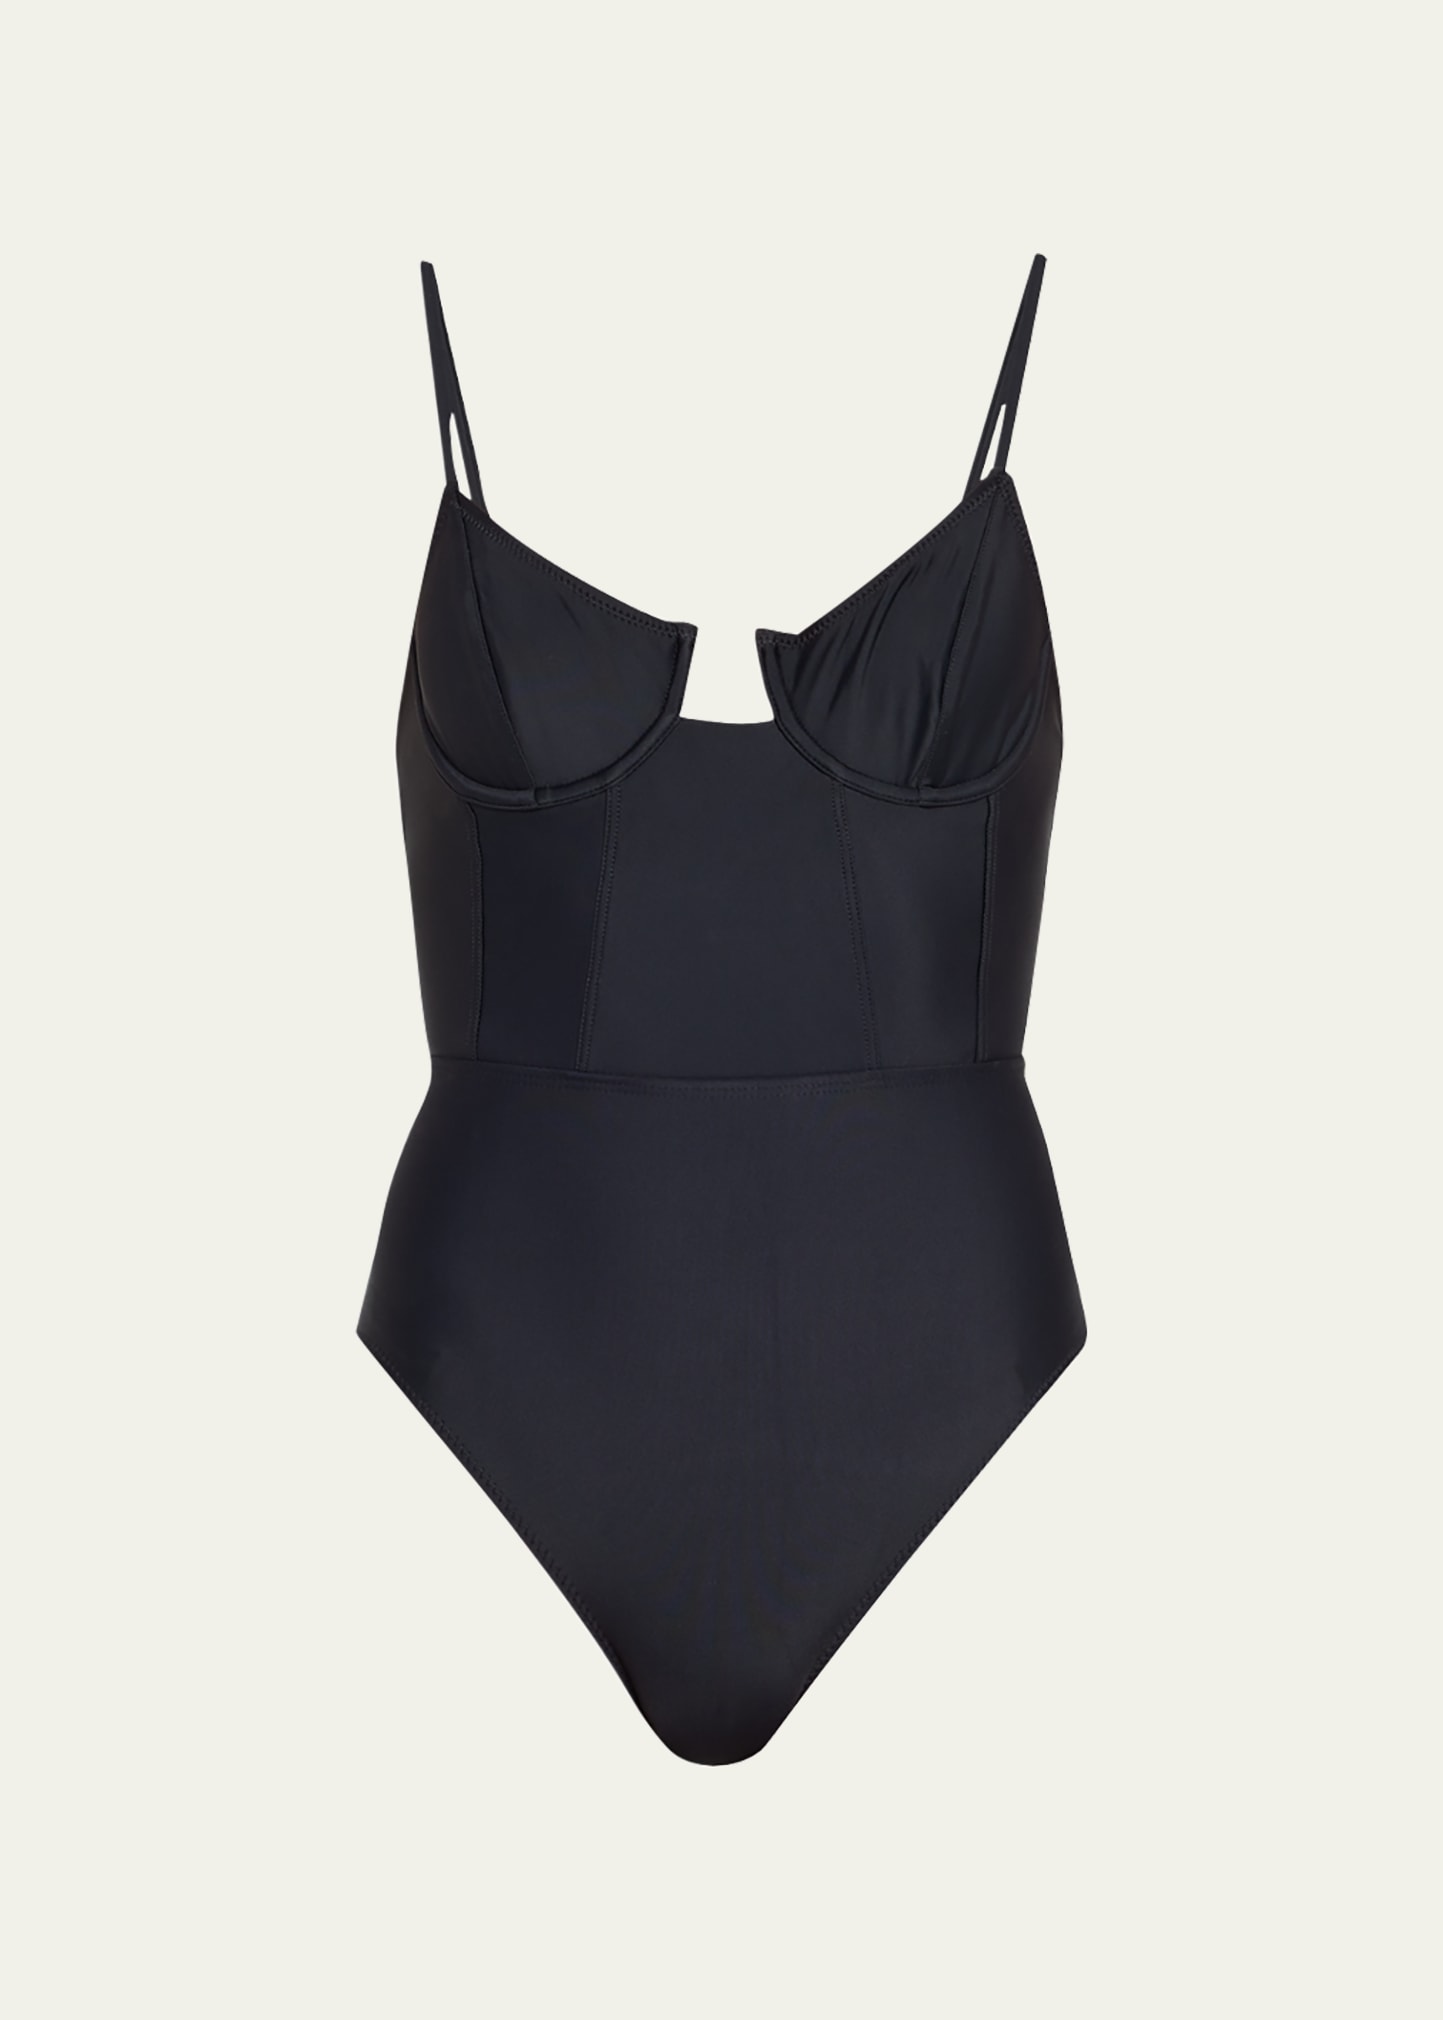 The Veronica Underwire One-Piece Swimsuit